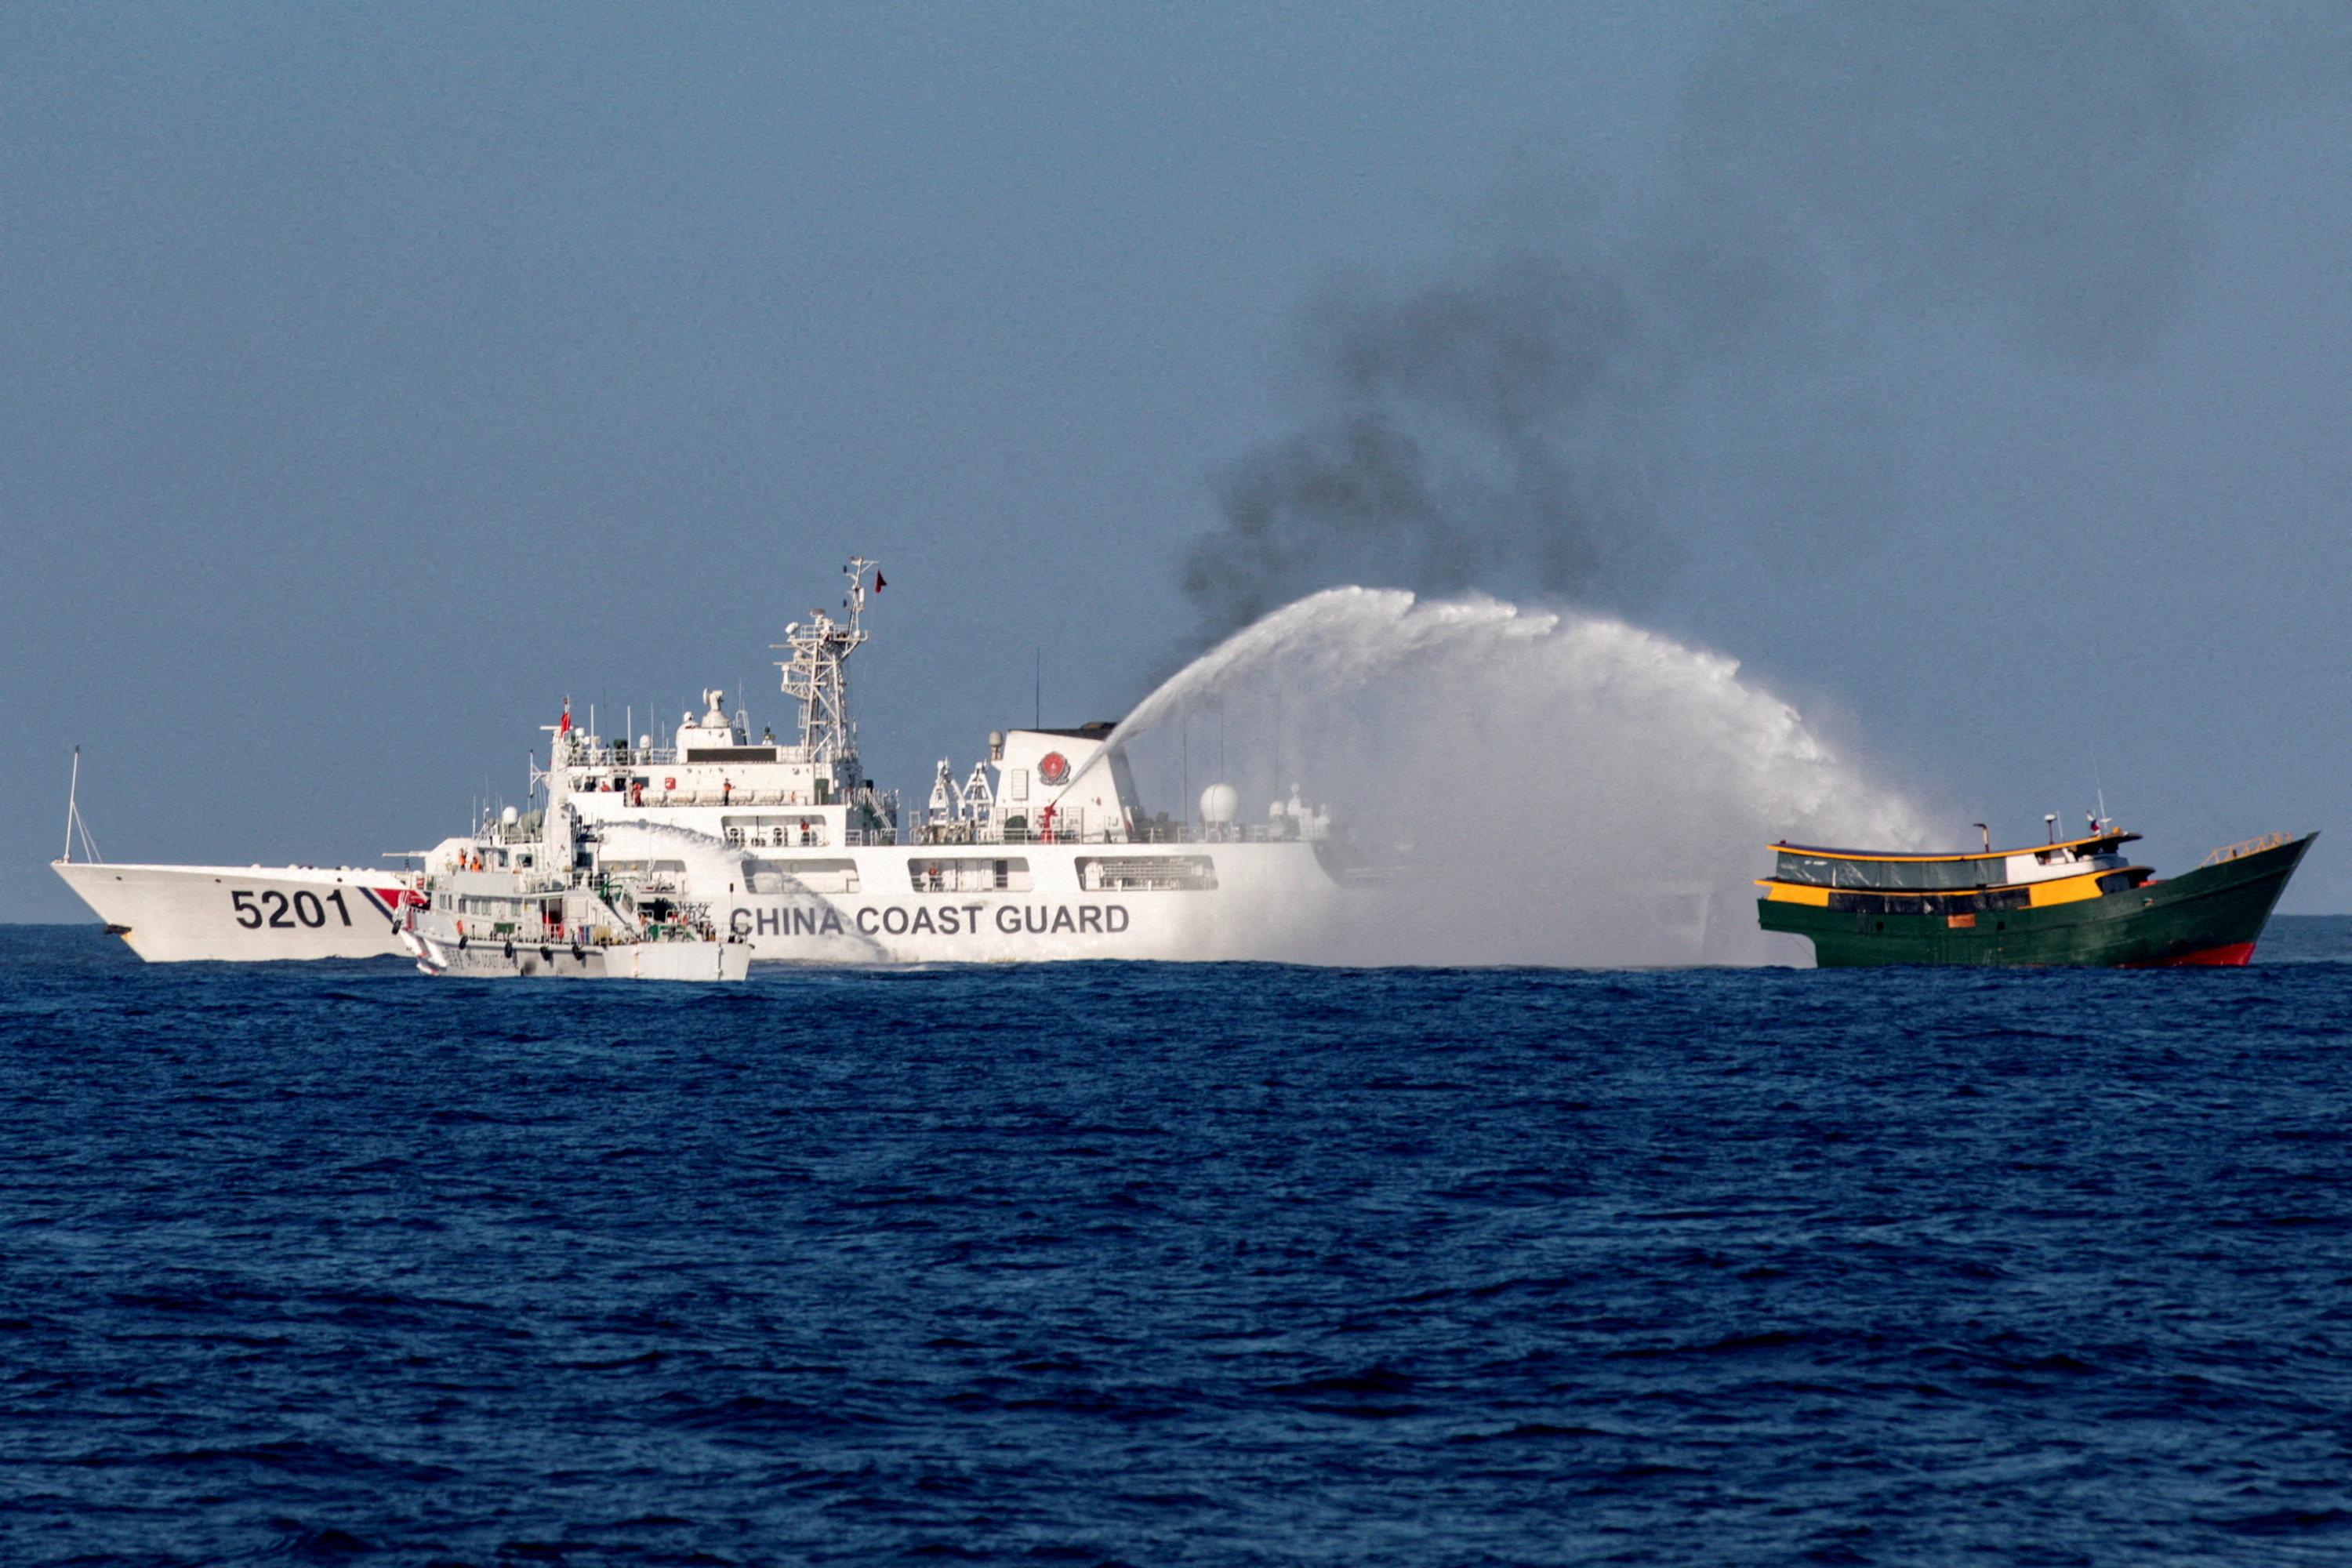 Chinese Coast Guard vessels fire water cannons towards Philippine resupply vessel Unaizah as it makes its way to a resupply mission at Second Thomas Shoal in the South China Sea on Saturday. Photo: Reuters